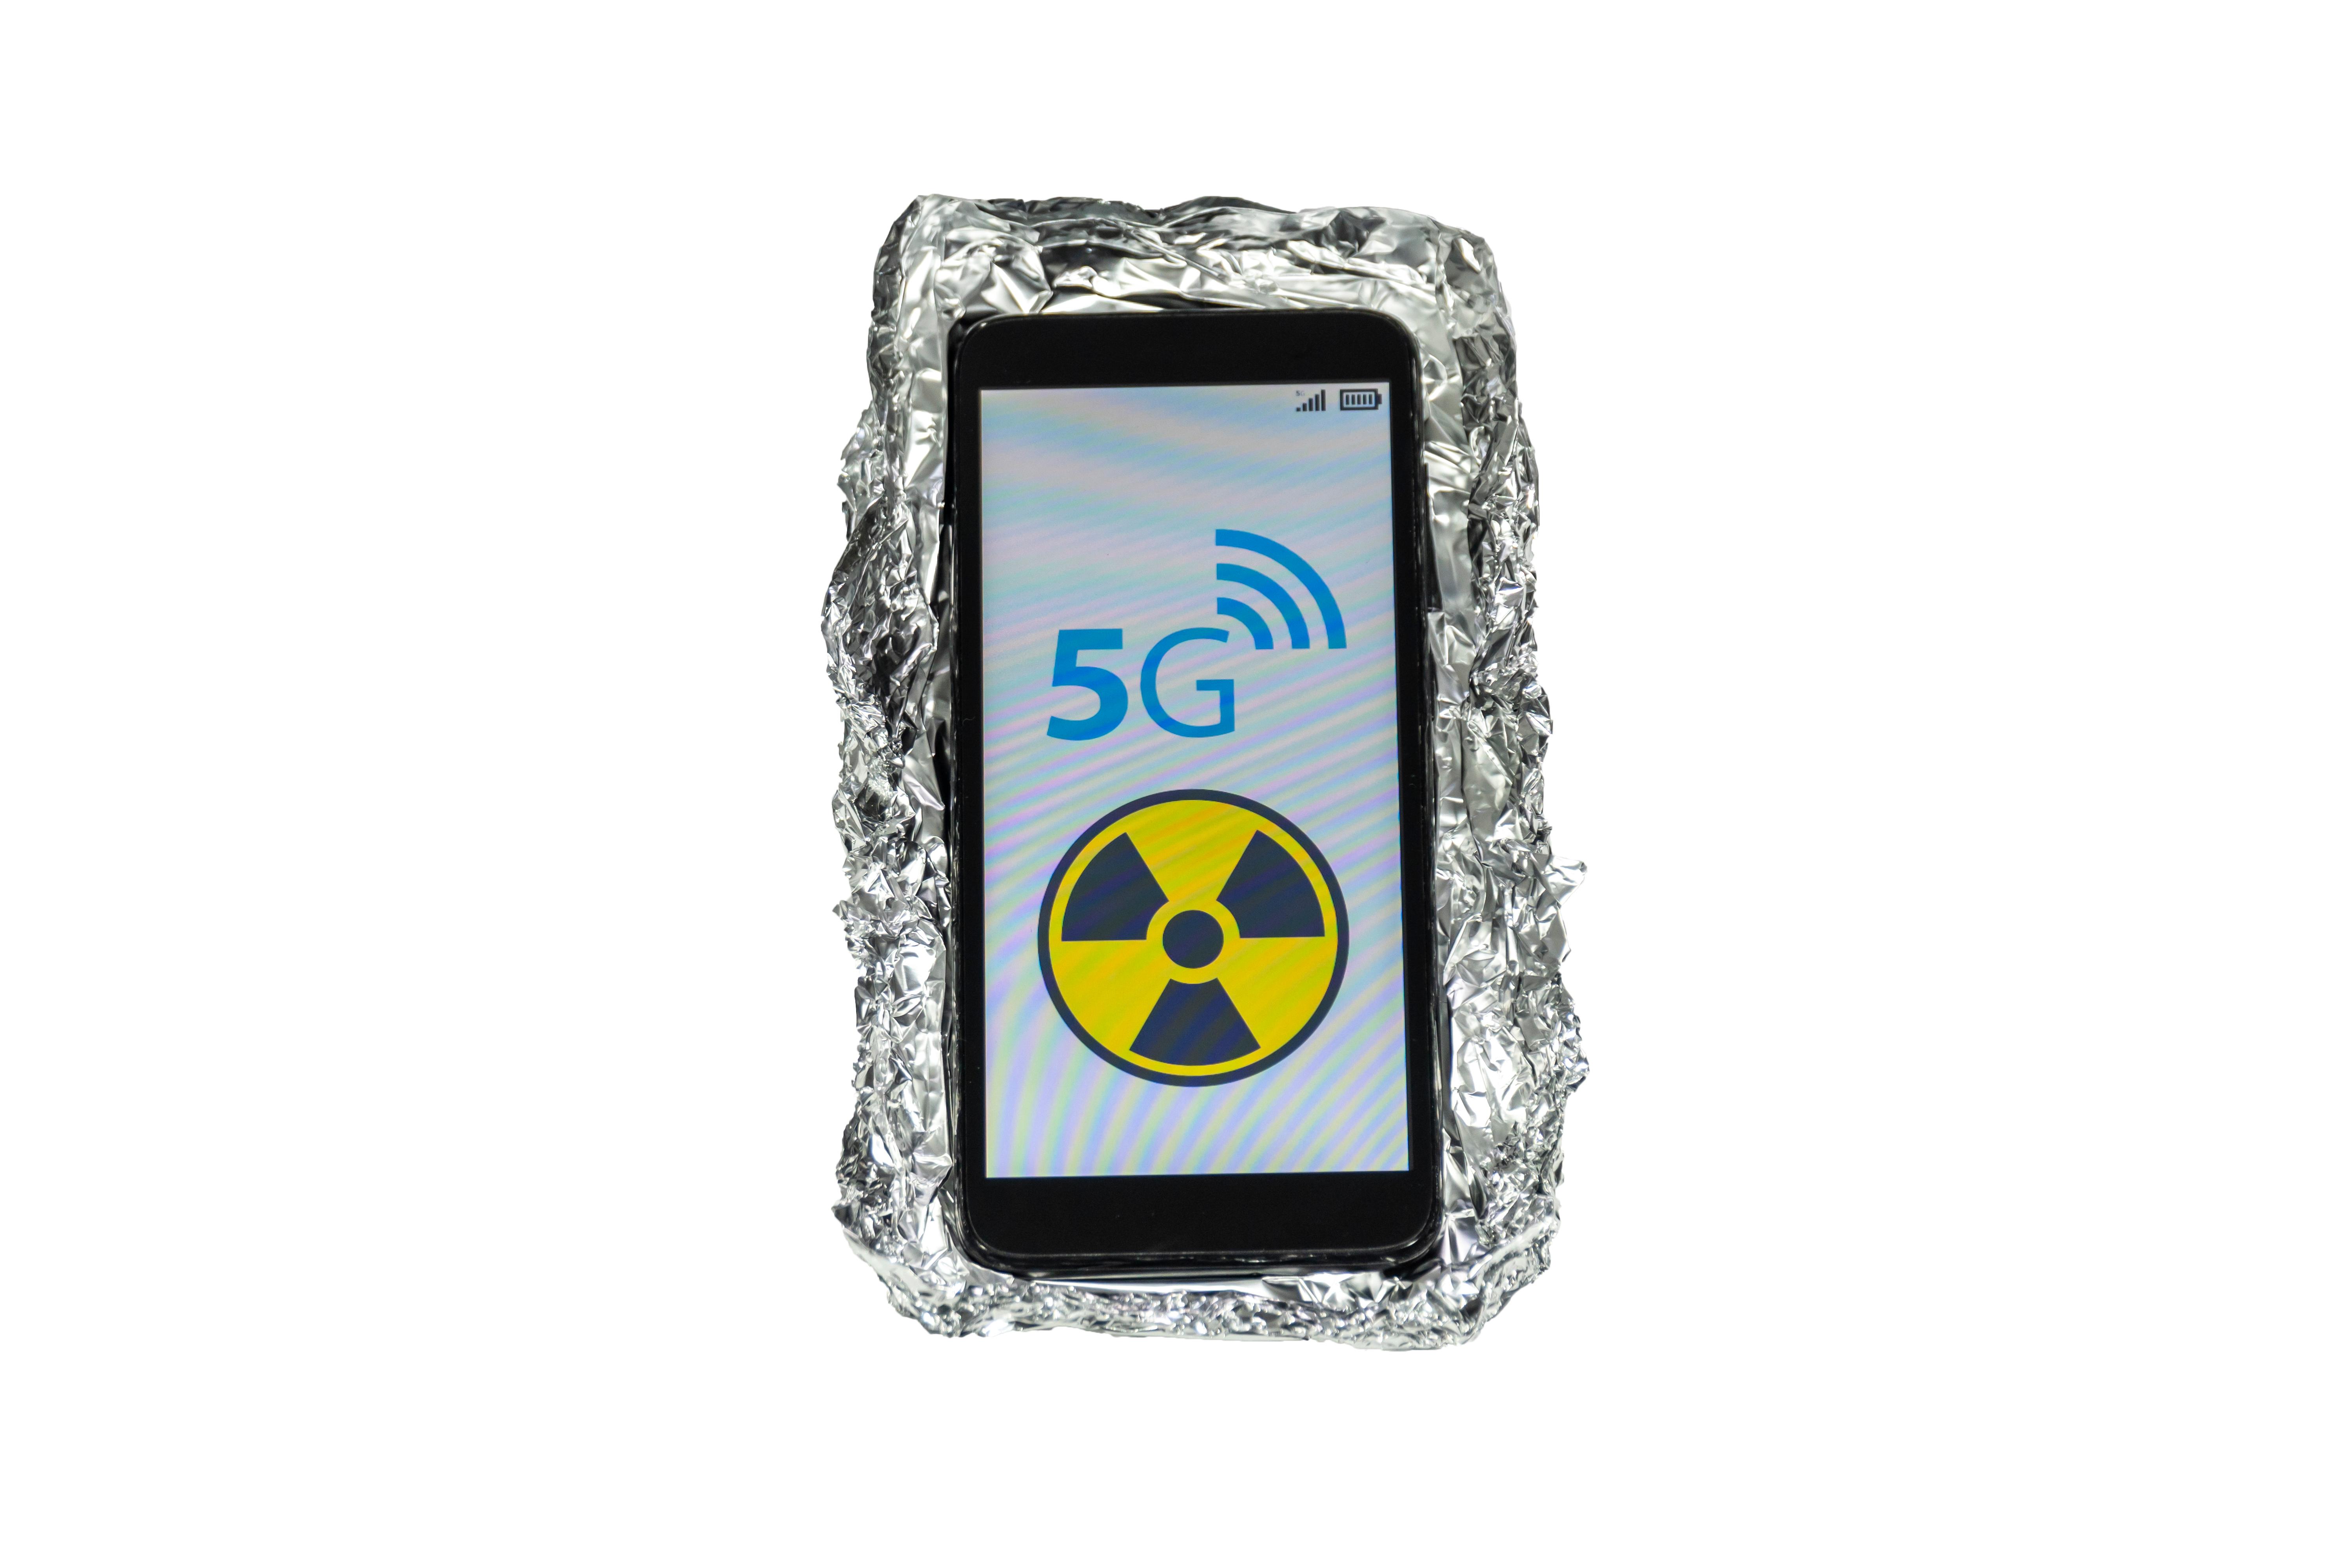 What Happens if You Wrap Your Cell Phone in Aluminum Foil? Details